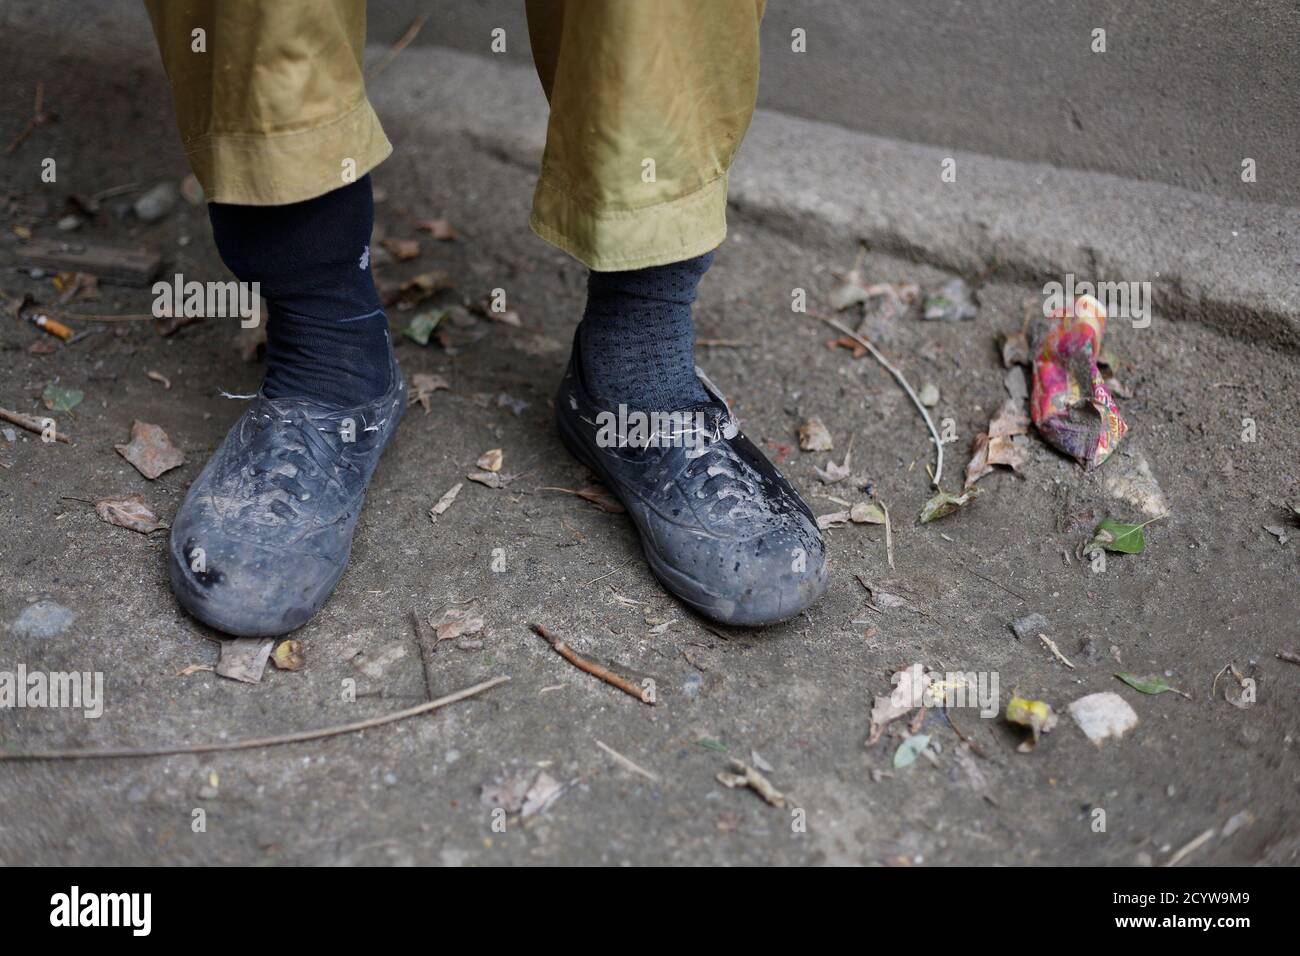 The feet of porter Ibrahim Sino, 33, are pictured following a 16-day K2  base camp trek, in the village of Askole in the Karakoram mountain range in  Pakistan September 11, 2014. A